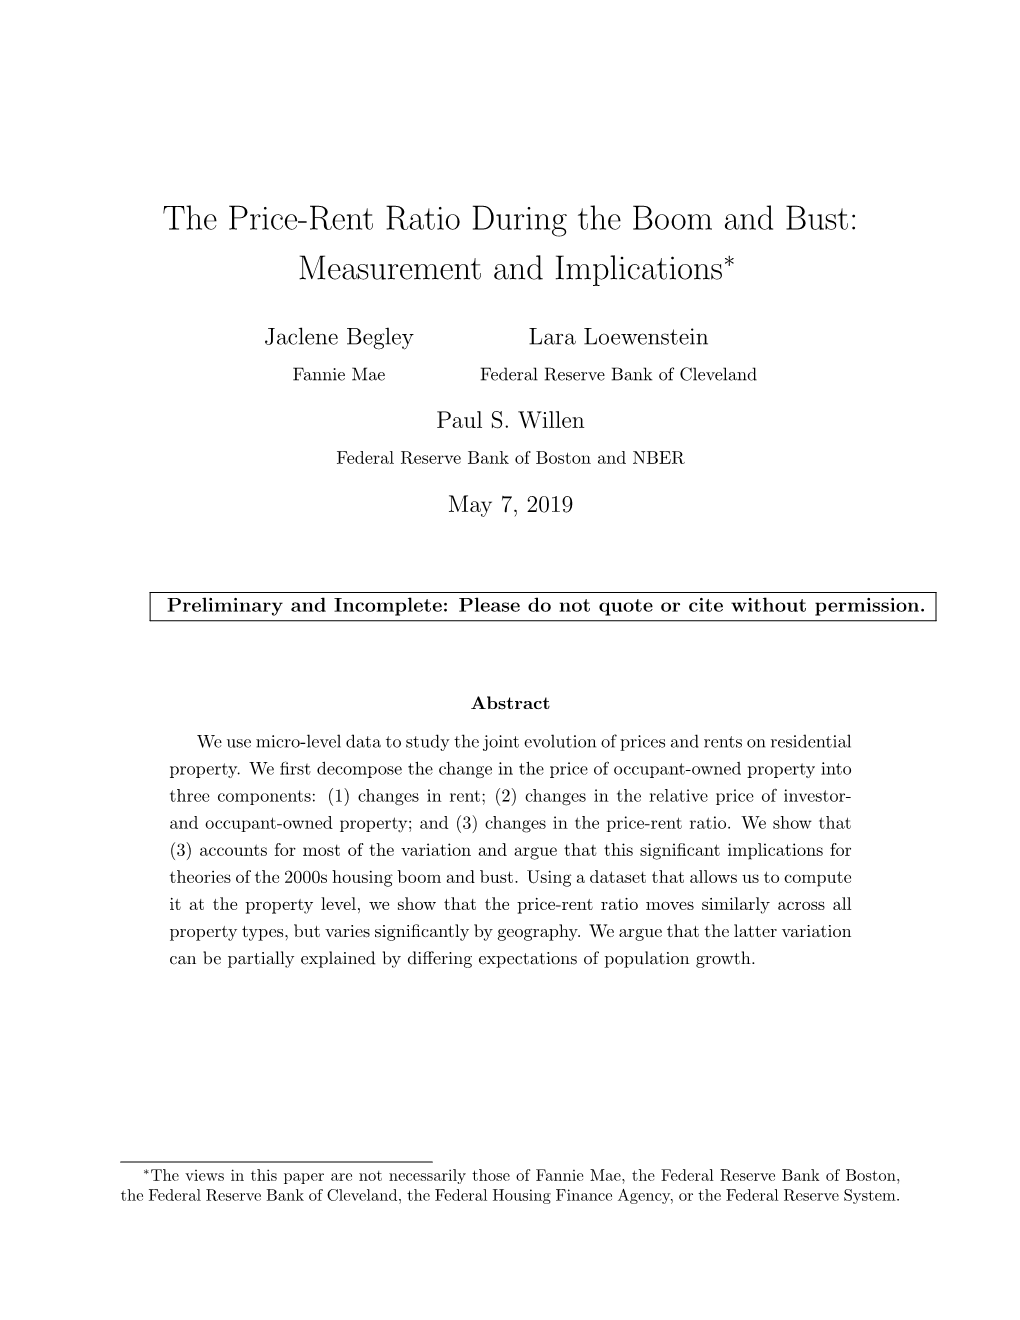 The Price-Rent Ratio During the Boom and Bust: Measurement and Implications∗